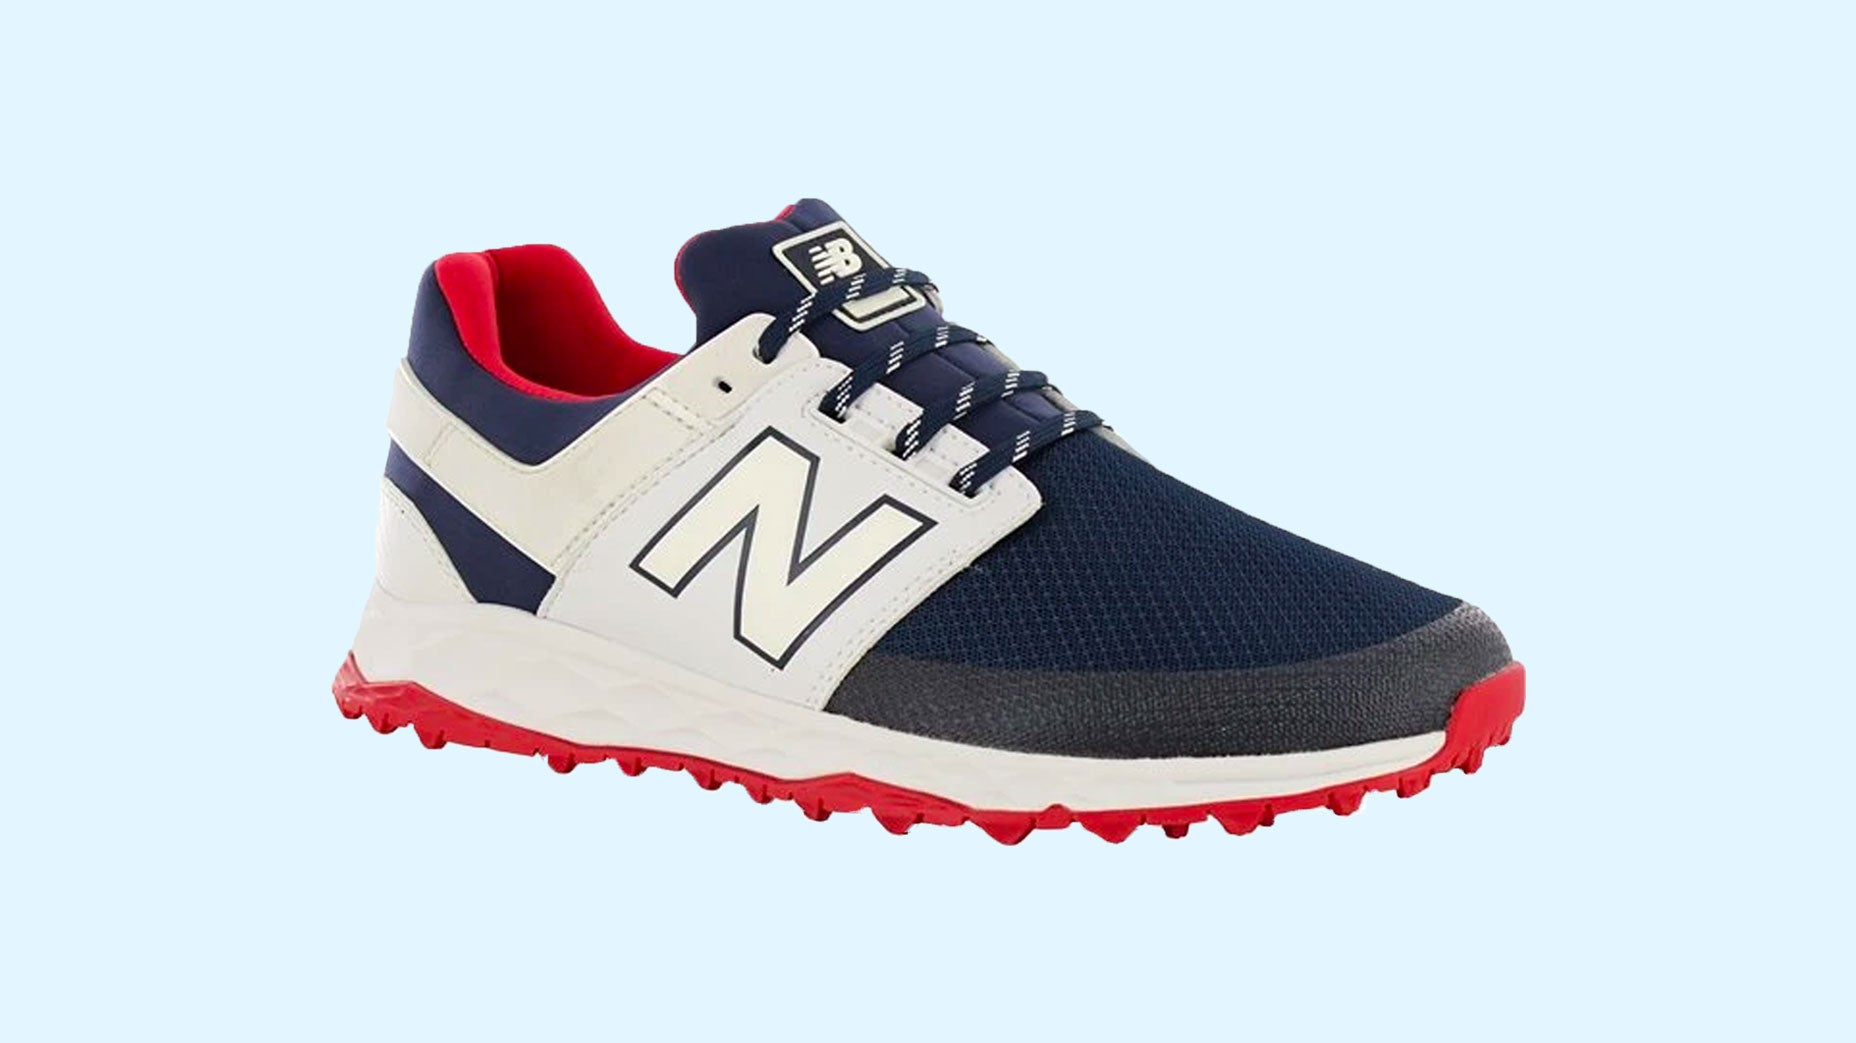 One thing to buy this week: New Balance Fresh Foam Links golf shoes